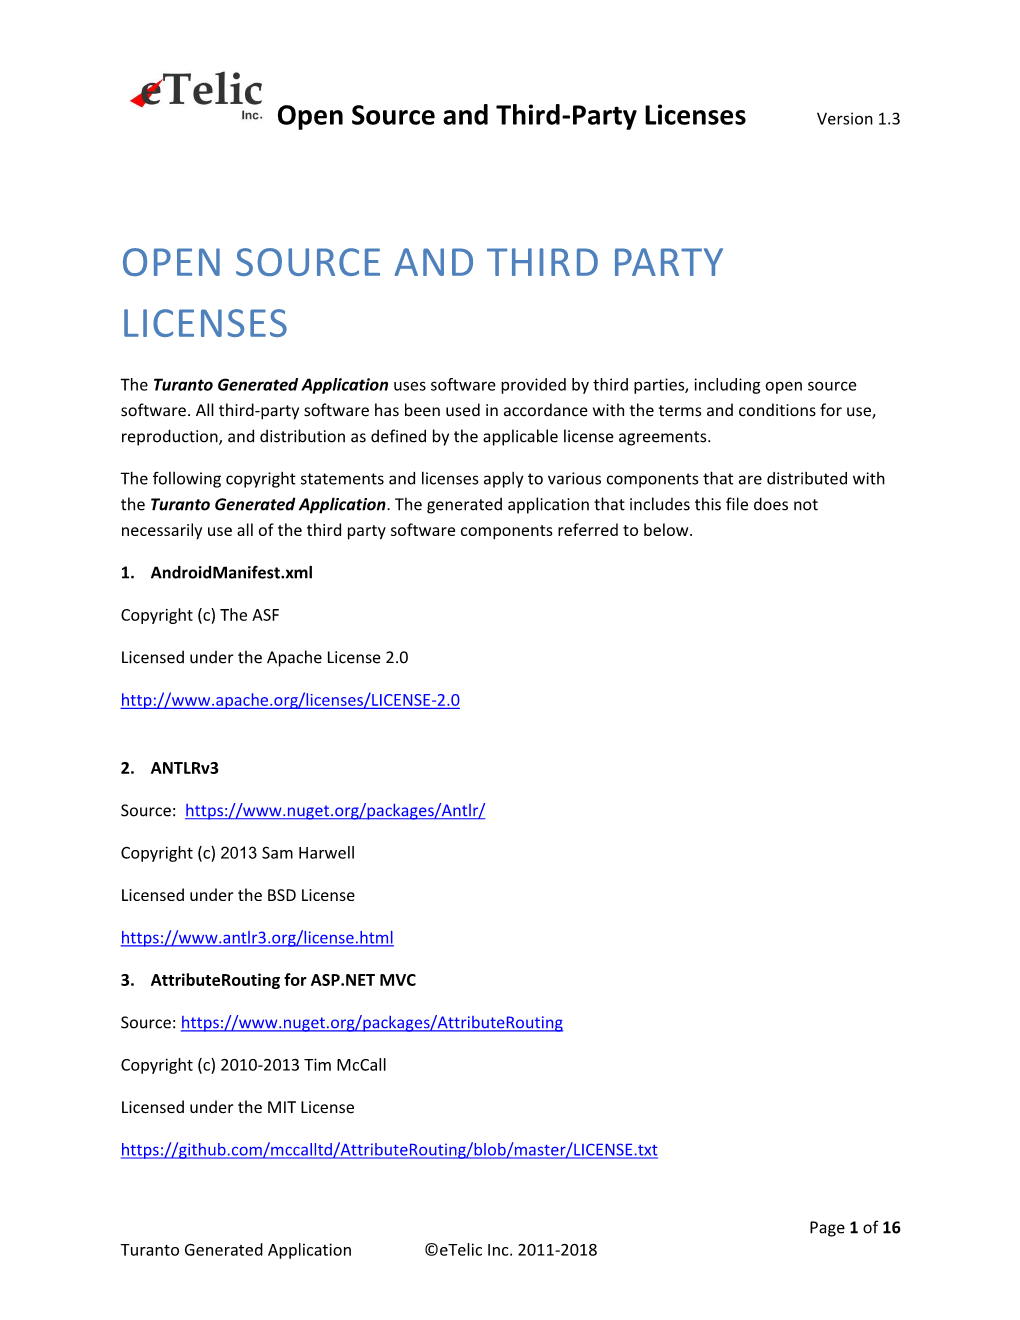 Open Source and Third Party Licenses